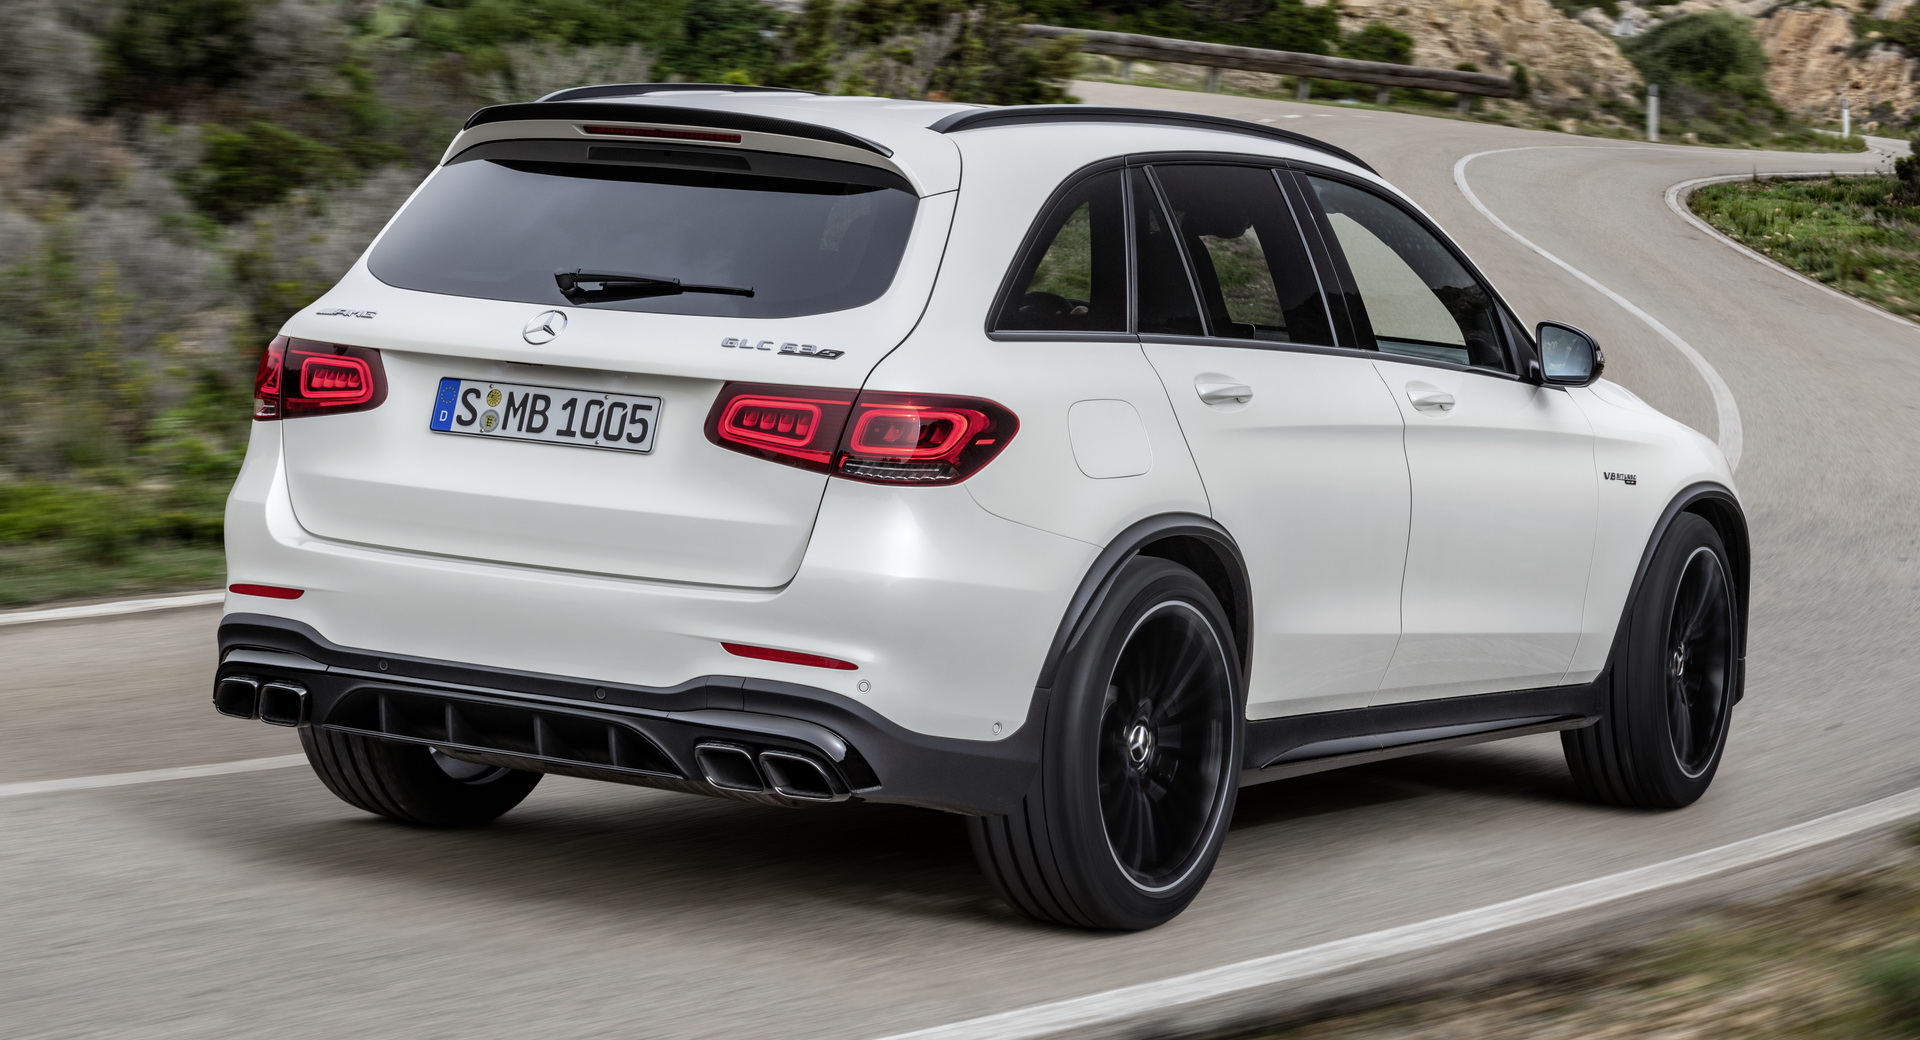 2022 Mercedes-AMG GLC 63 S SUV Finally Arrives In The US | Carscoops